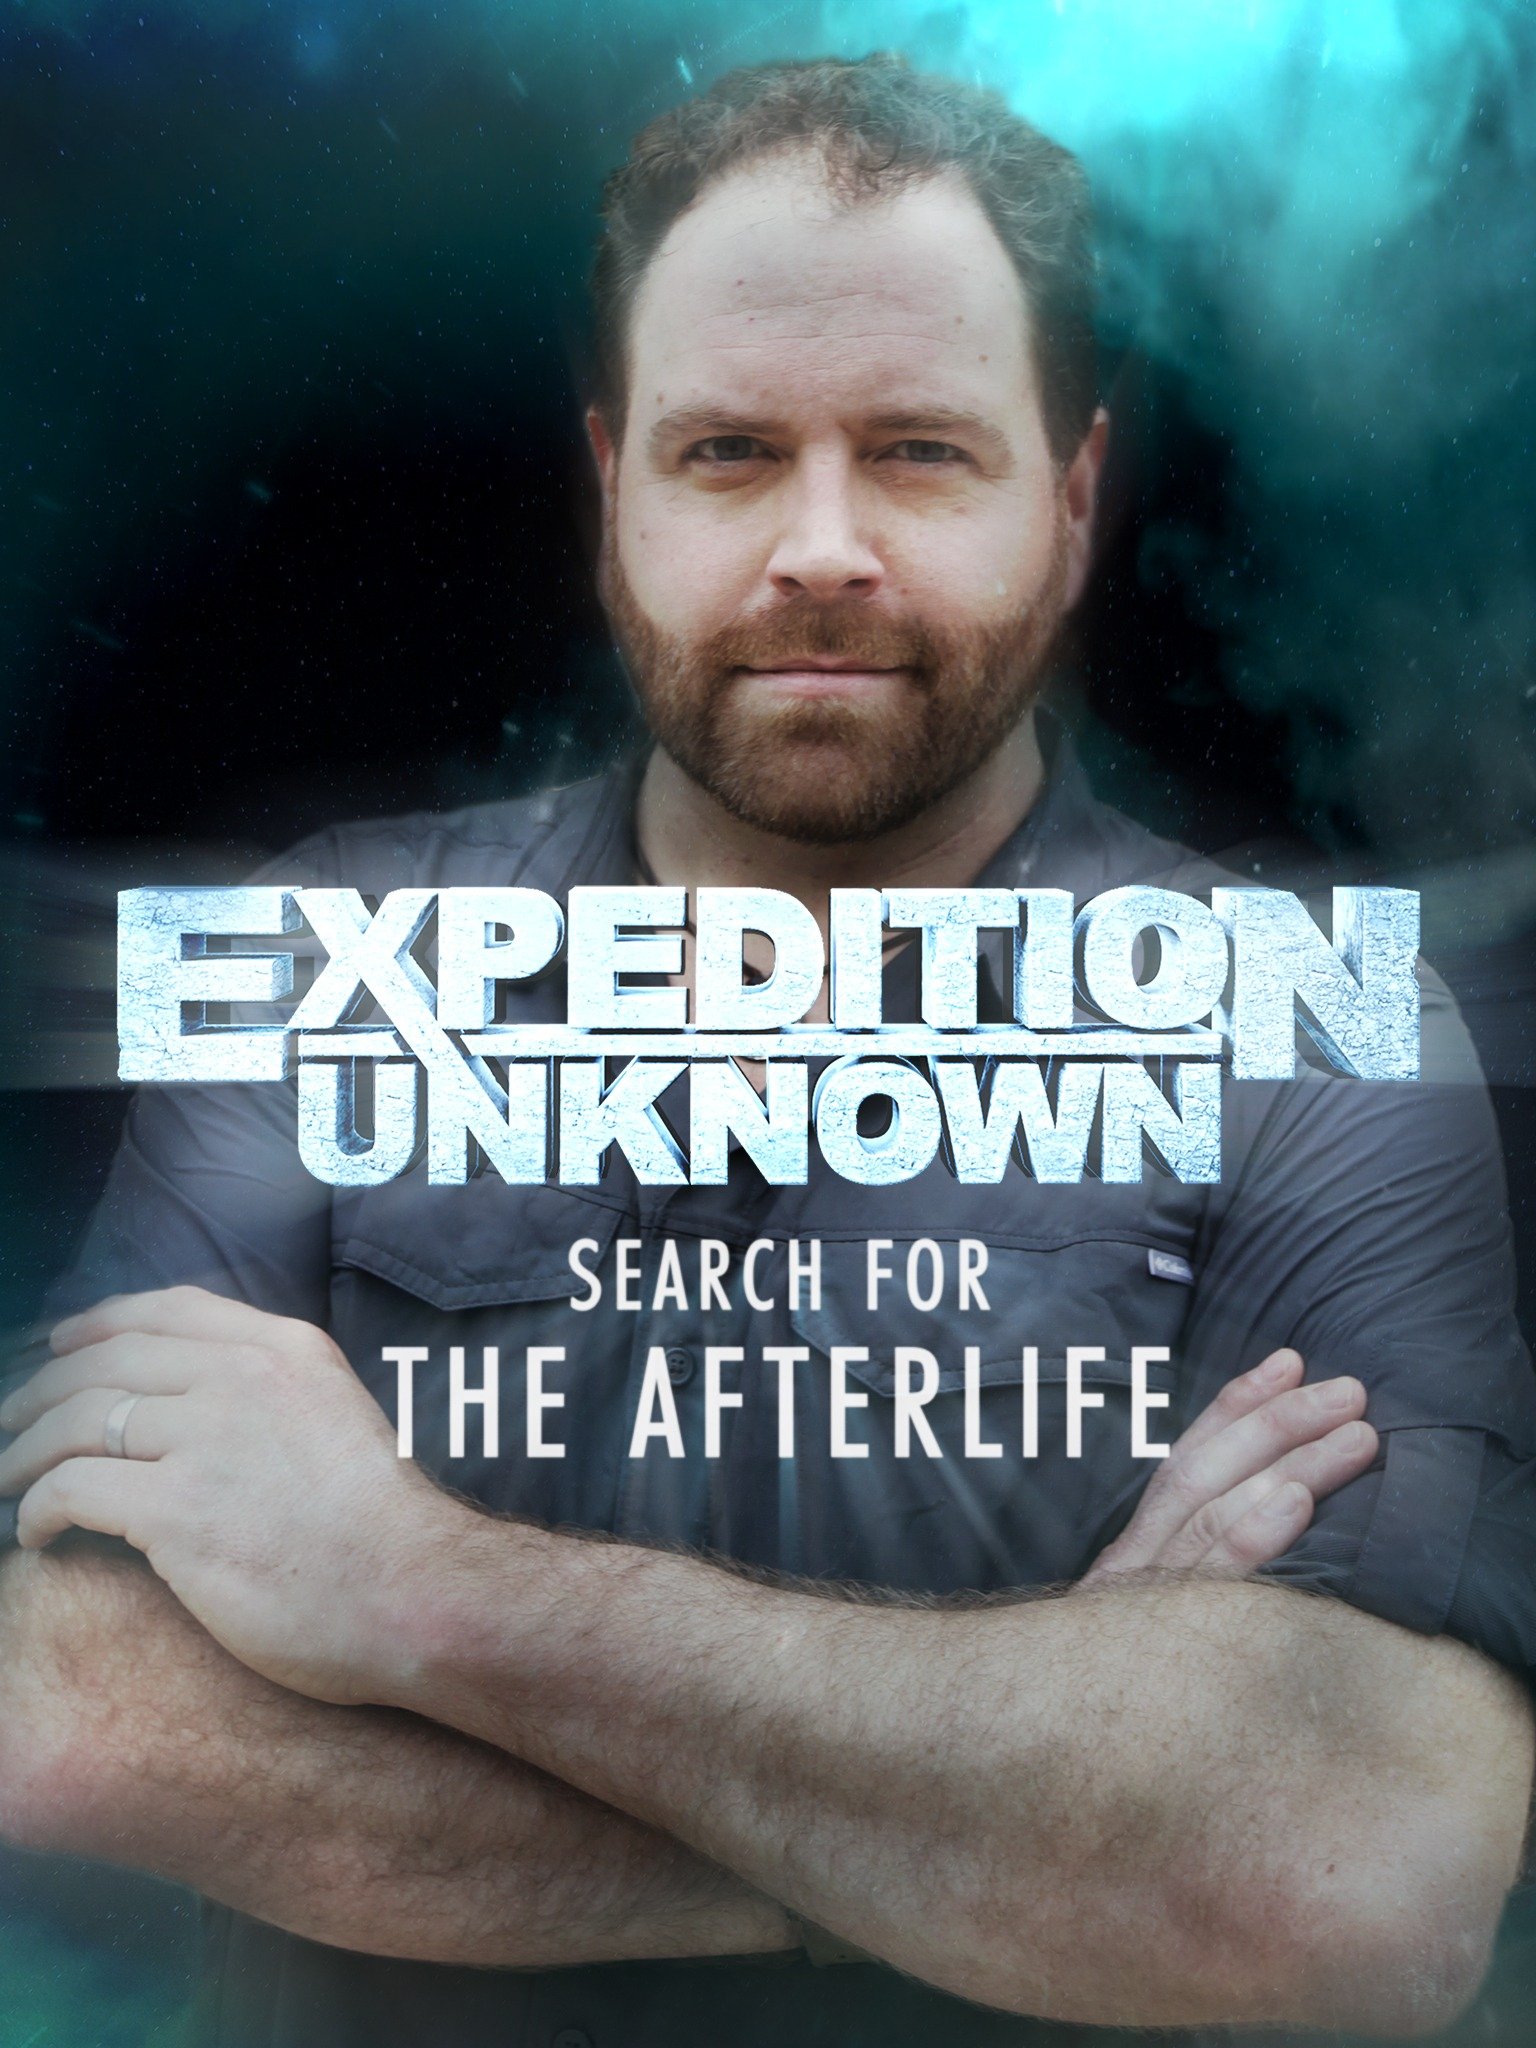 Expedition unknown search for the afterlife